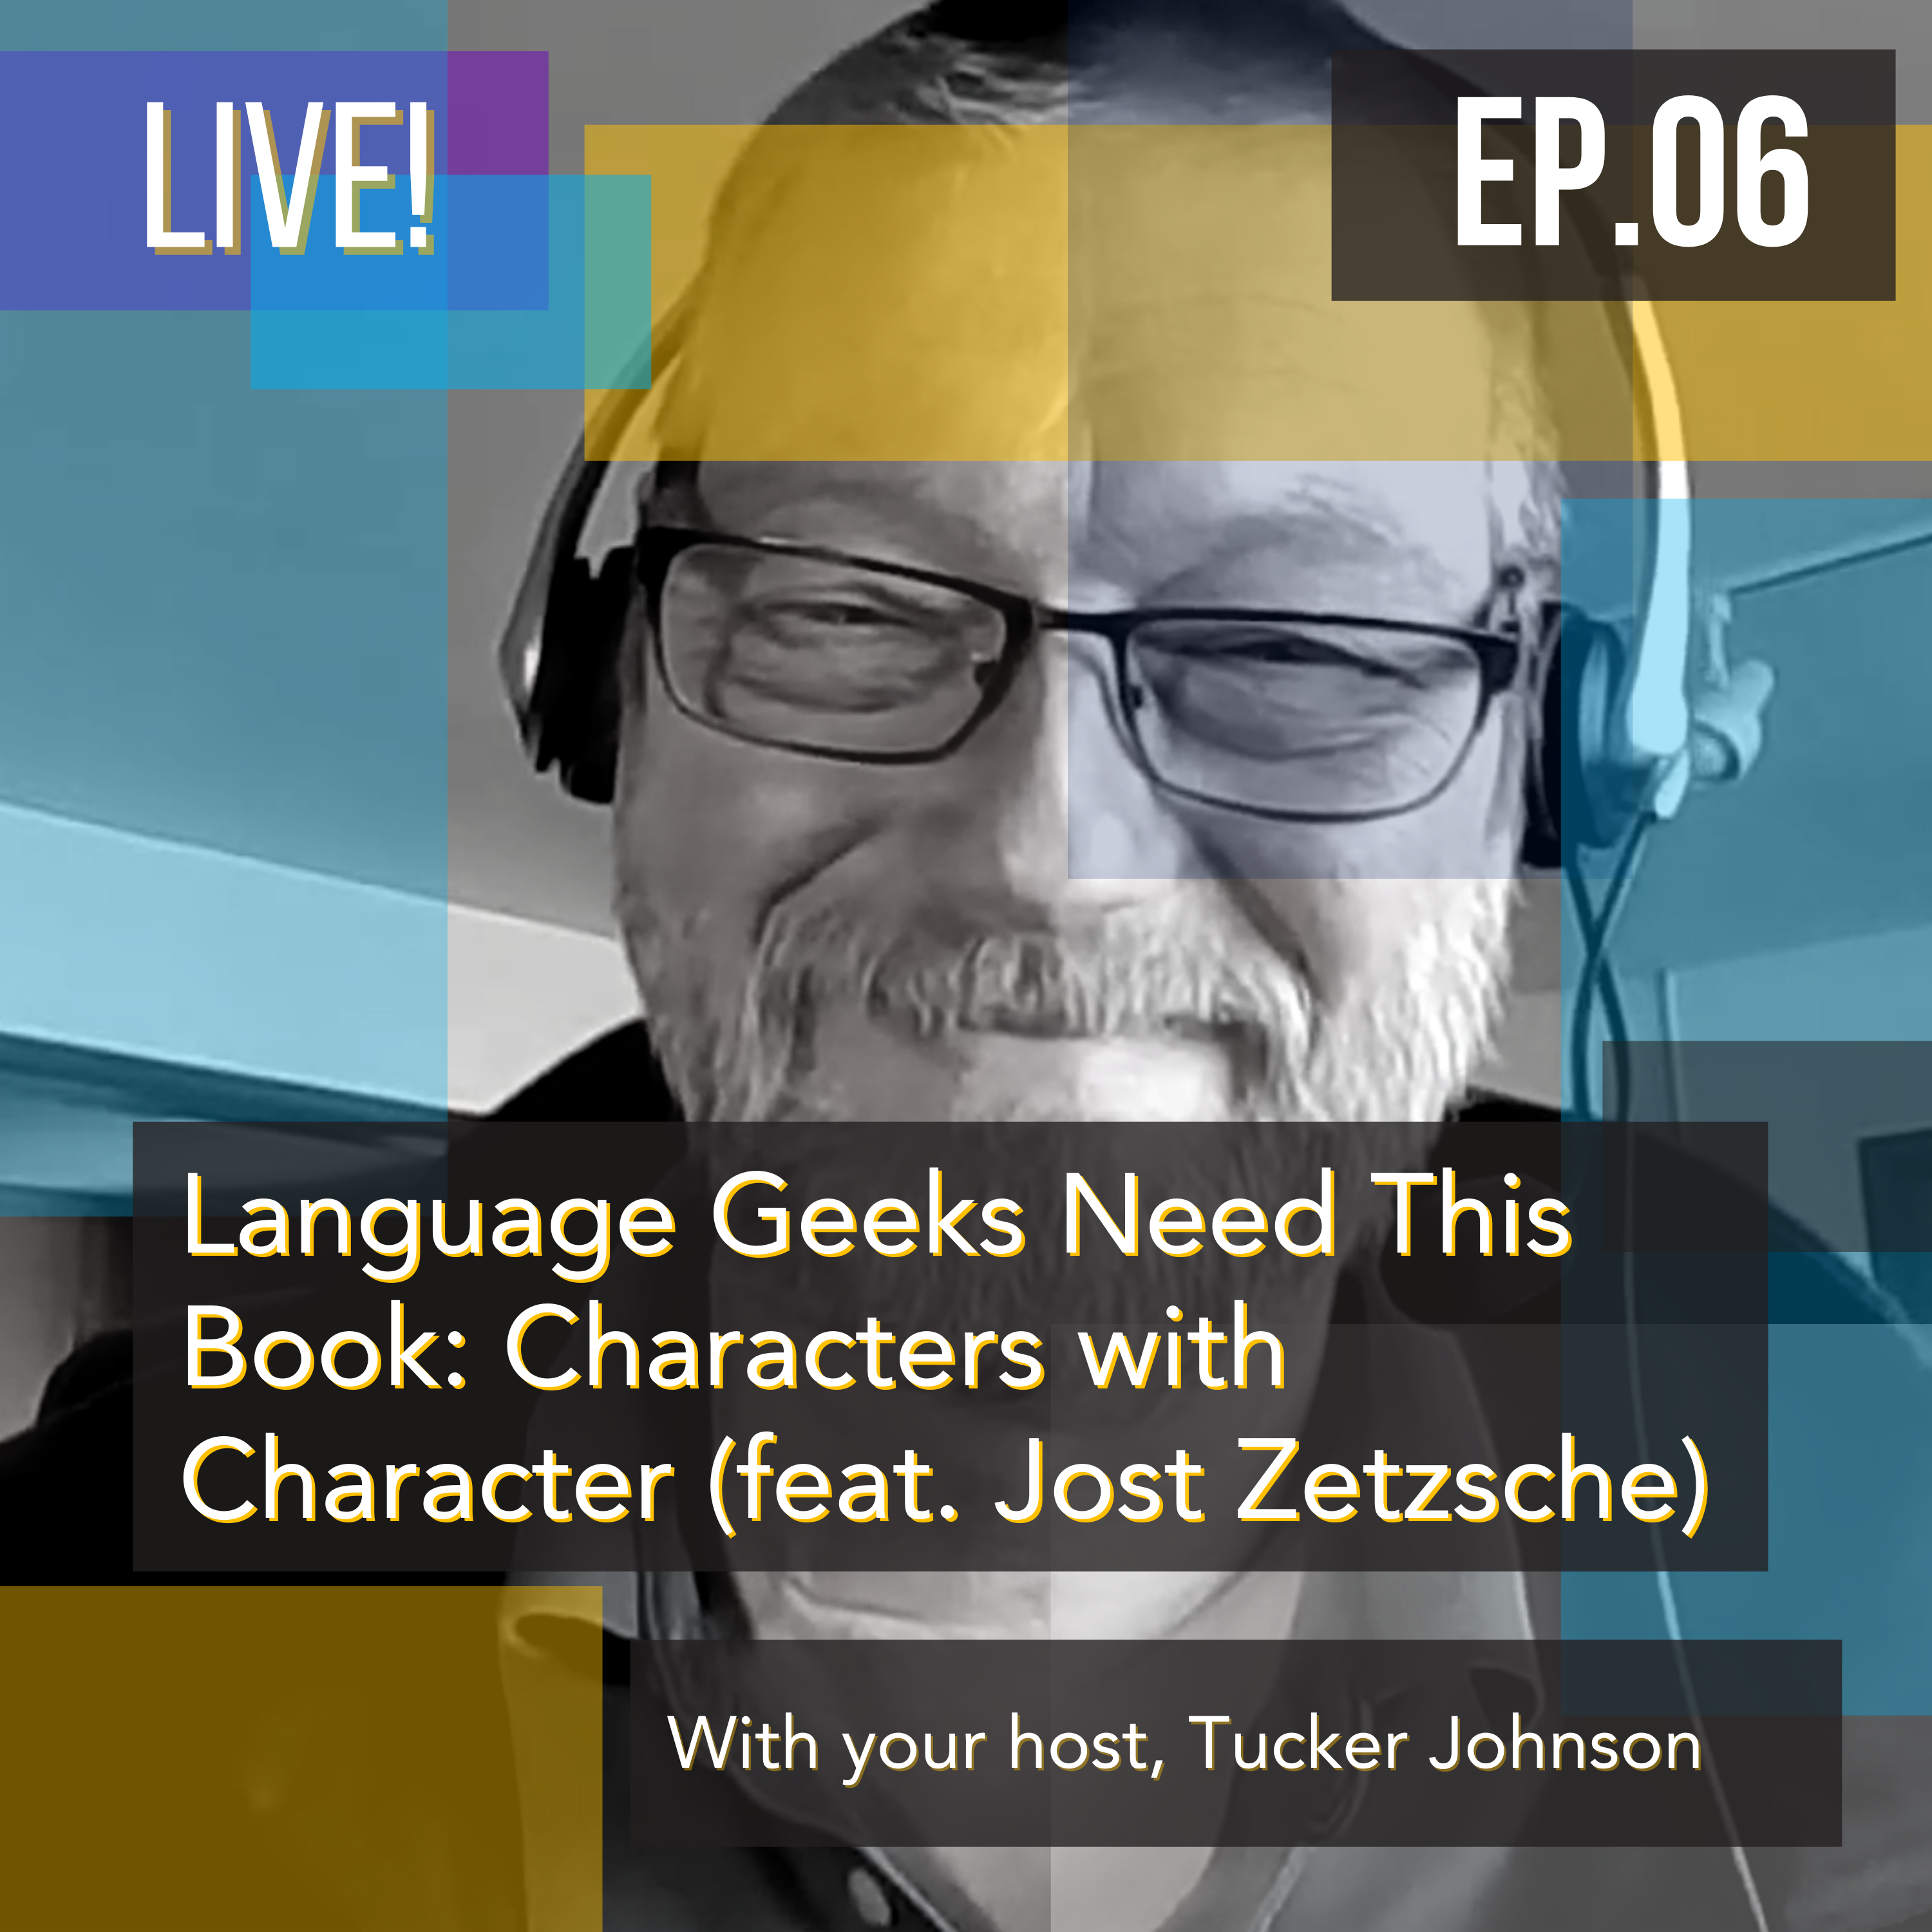 Language Geeks Need This Book: Characters with Character (feat. Jost Zetzsche)